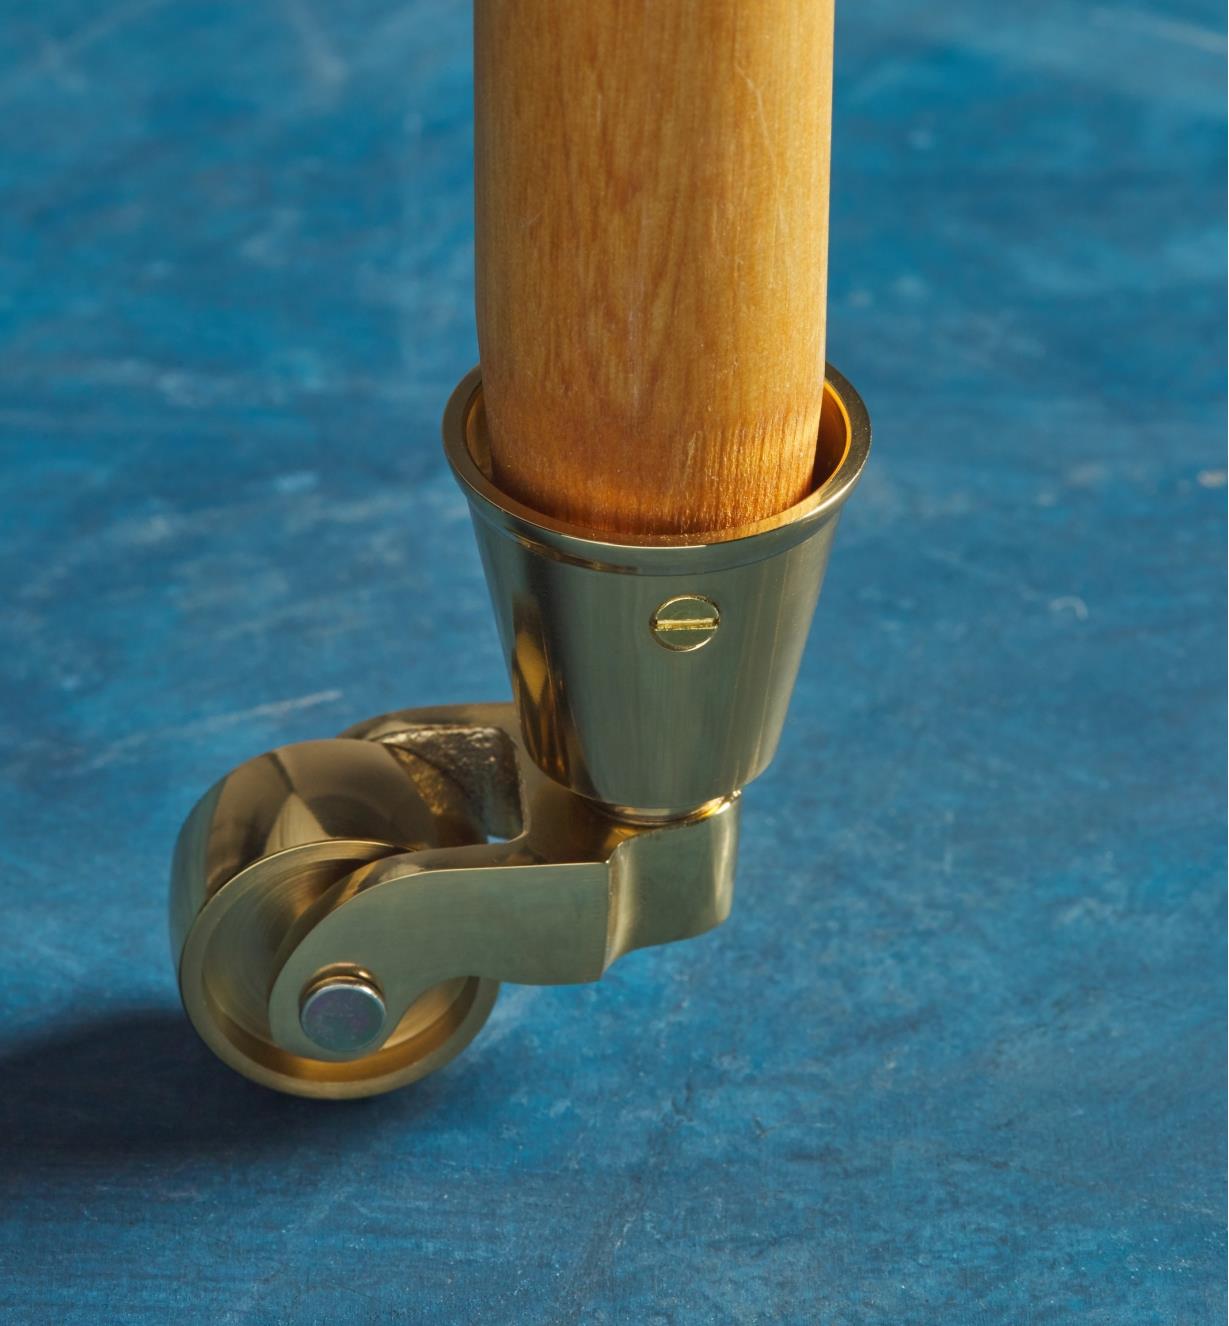 Brass screw used to mount a brass caster to a furniture leg